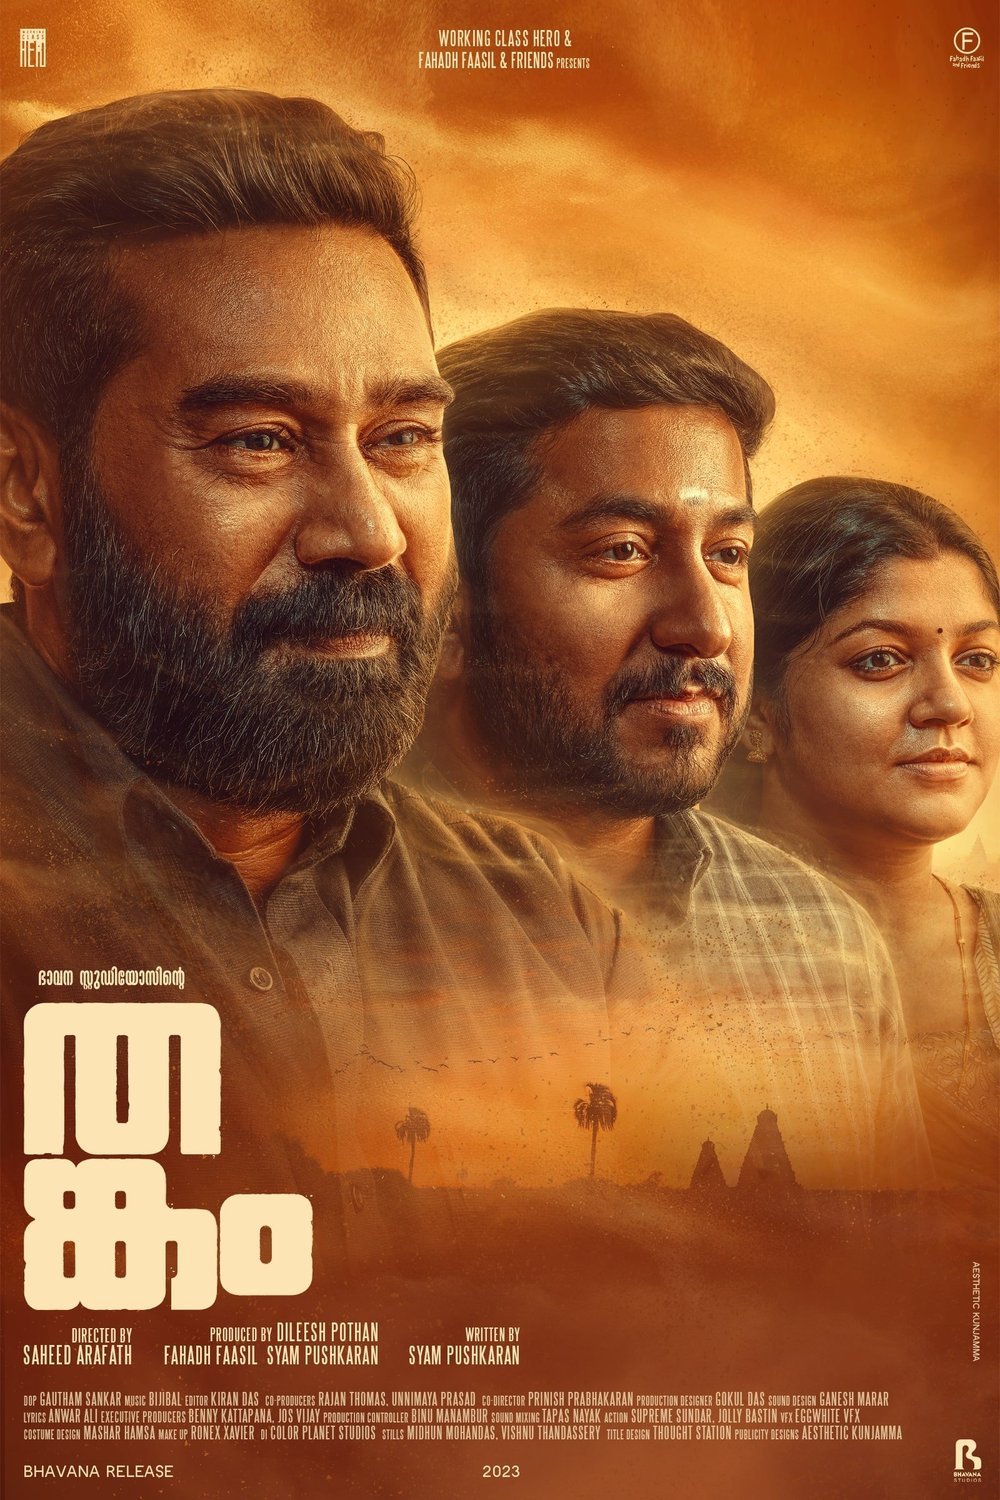 Malayalam poster of the movie Thankam